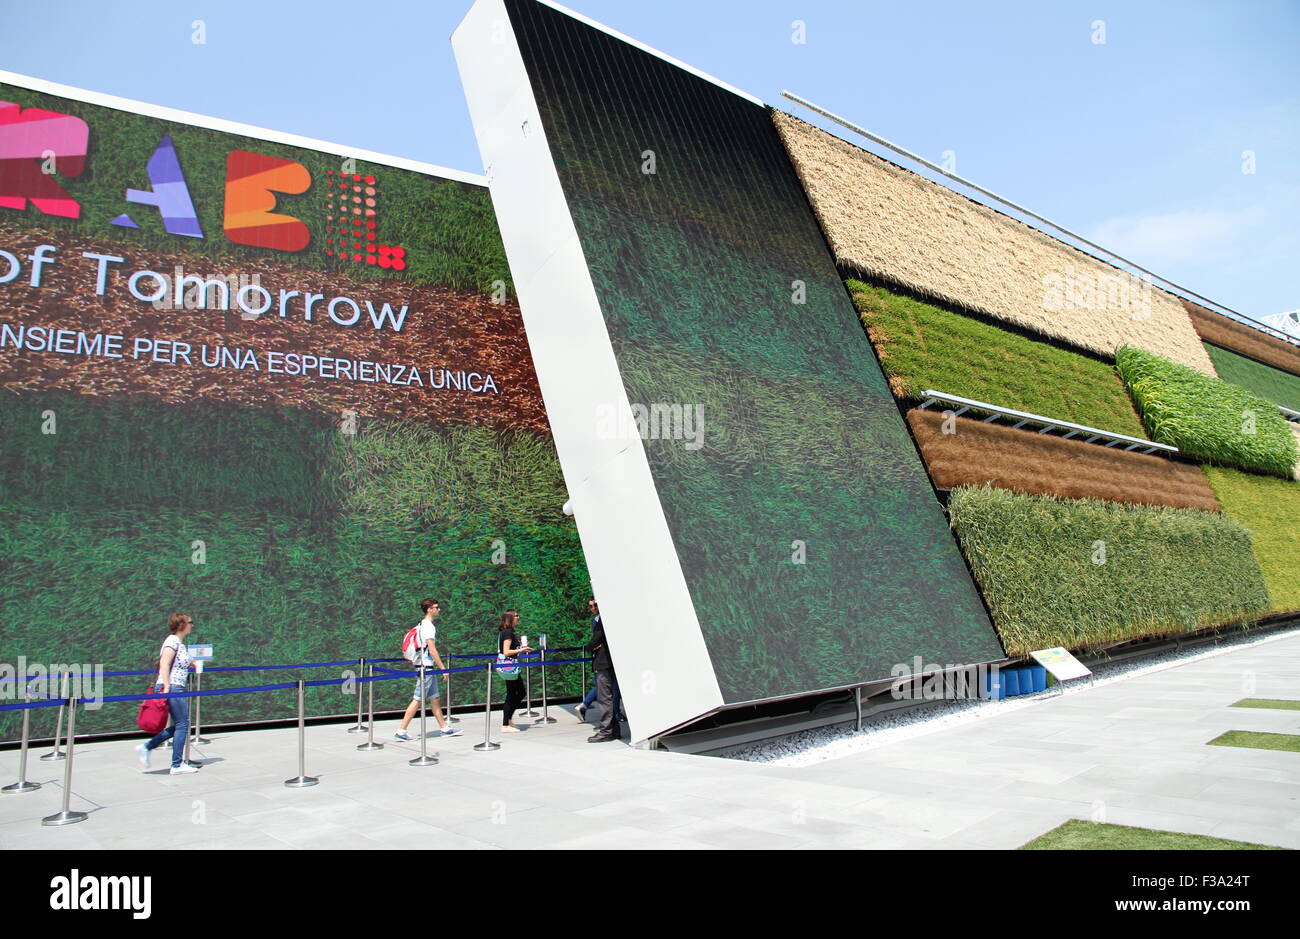 Cereal crops on the wall of the Israeli pavilion at the 2015 Expo in Milan, Italy Stock Photo